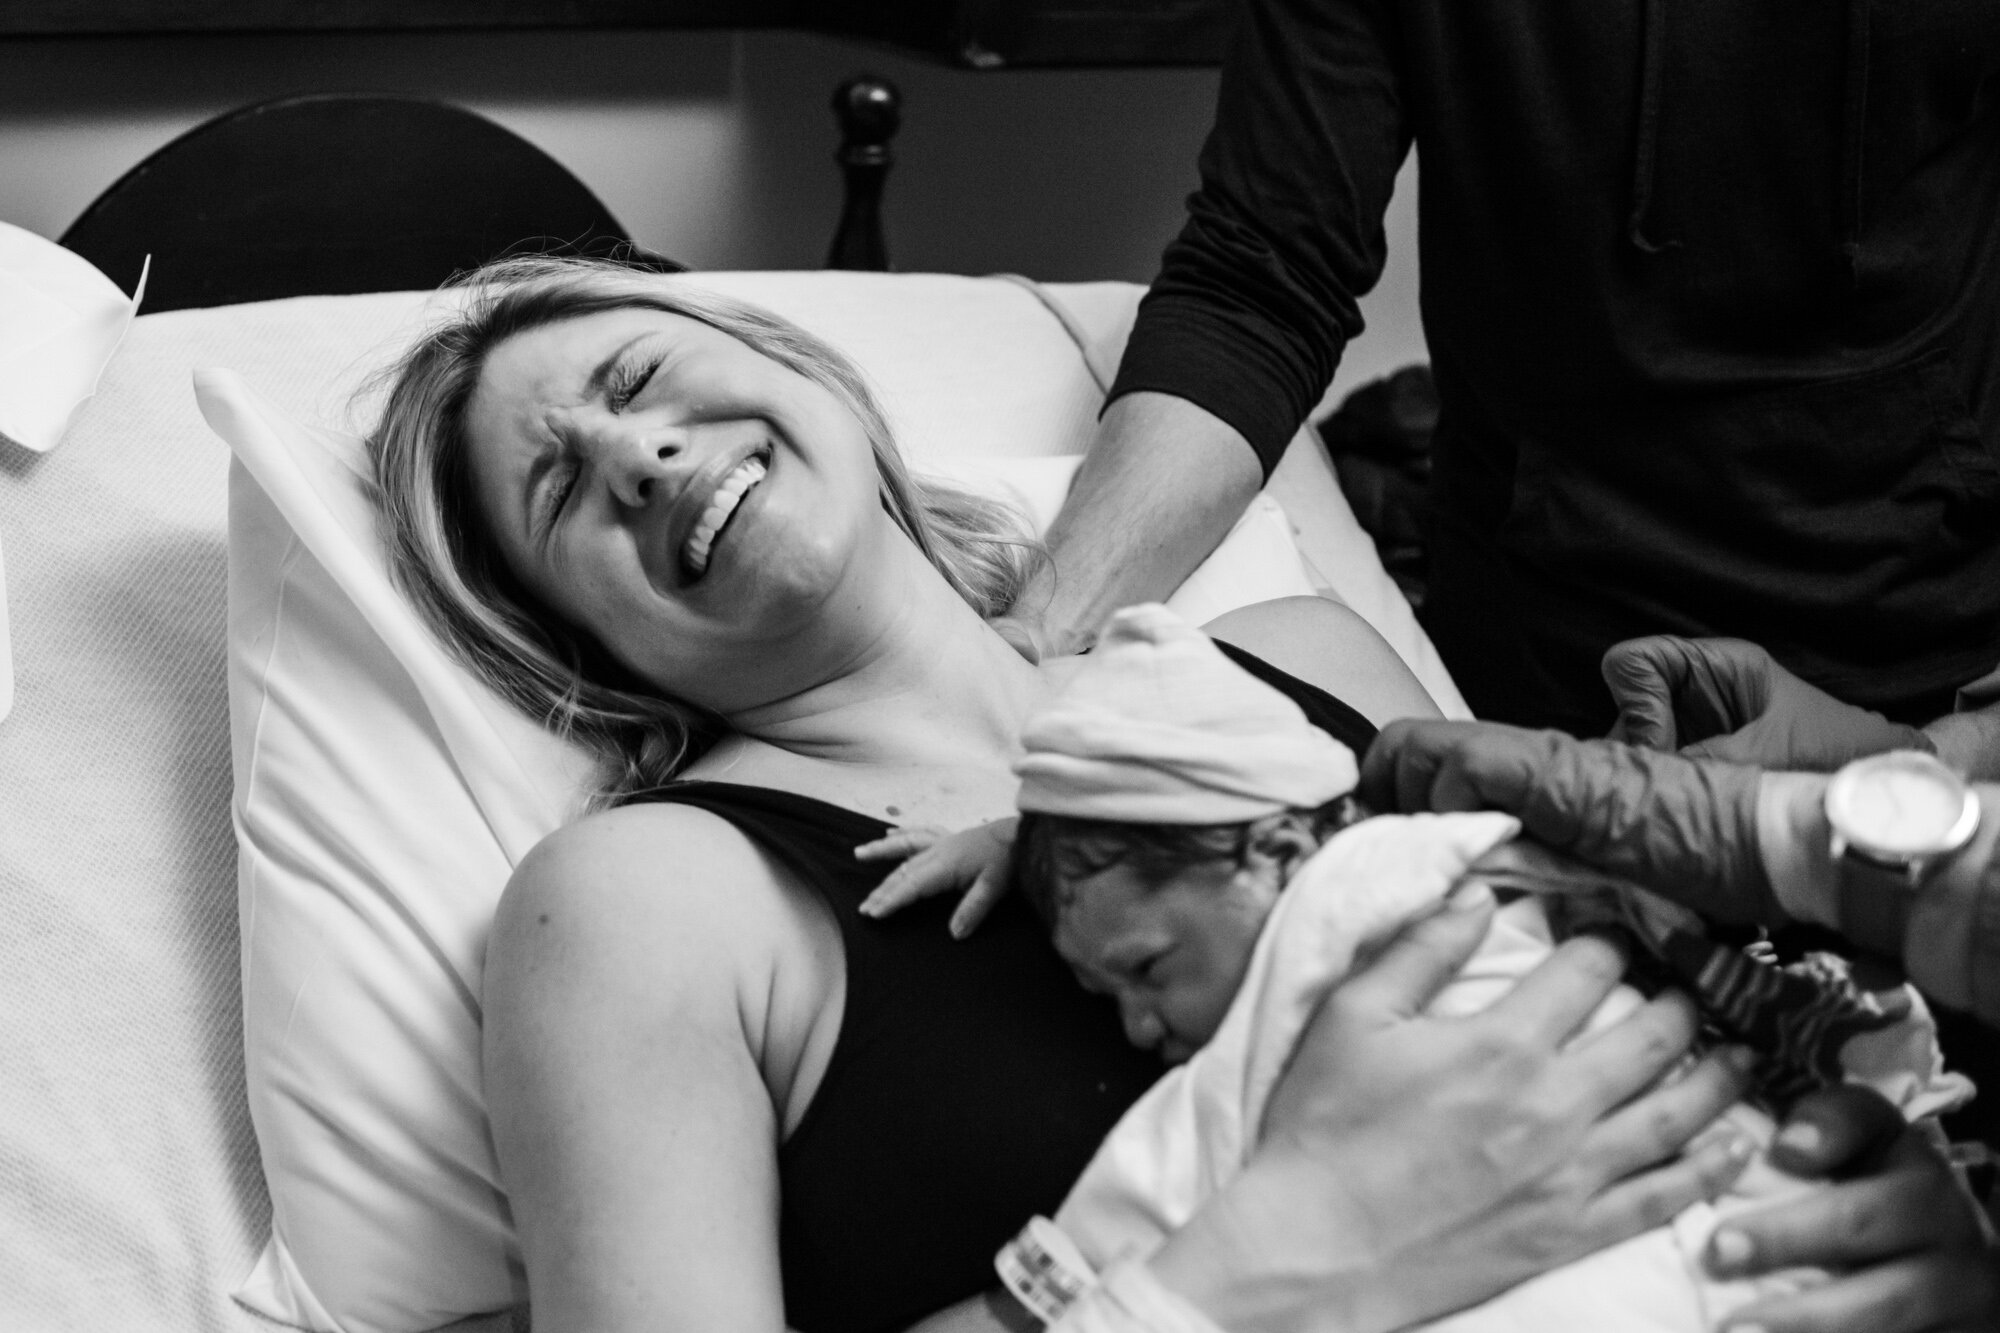 jacksonville mom laughing with joy after baby is born